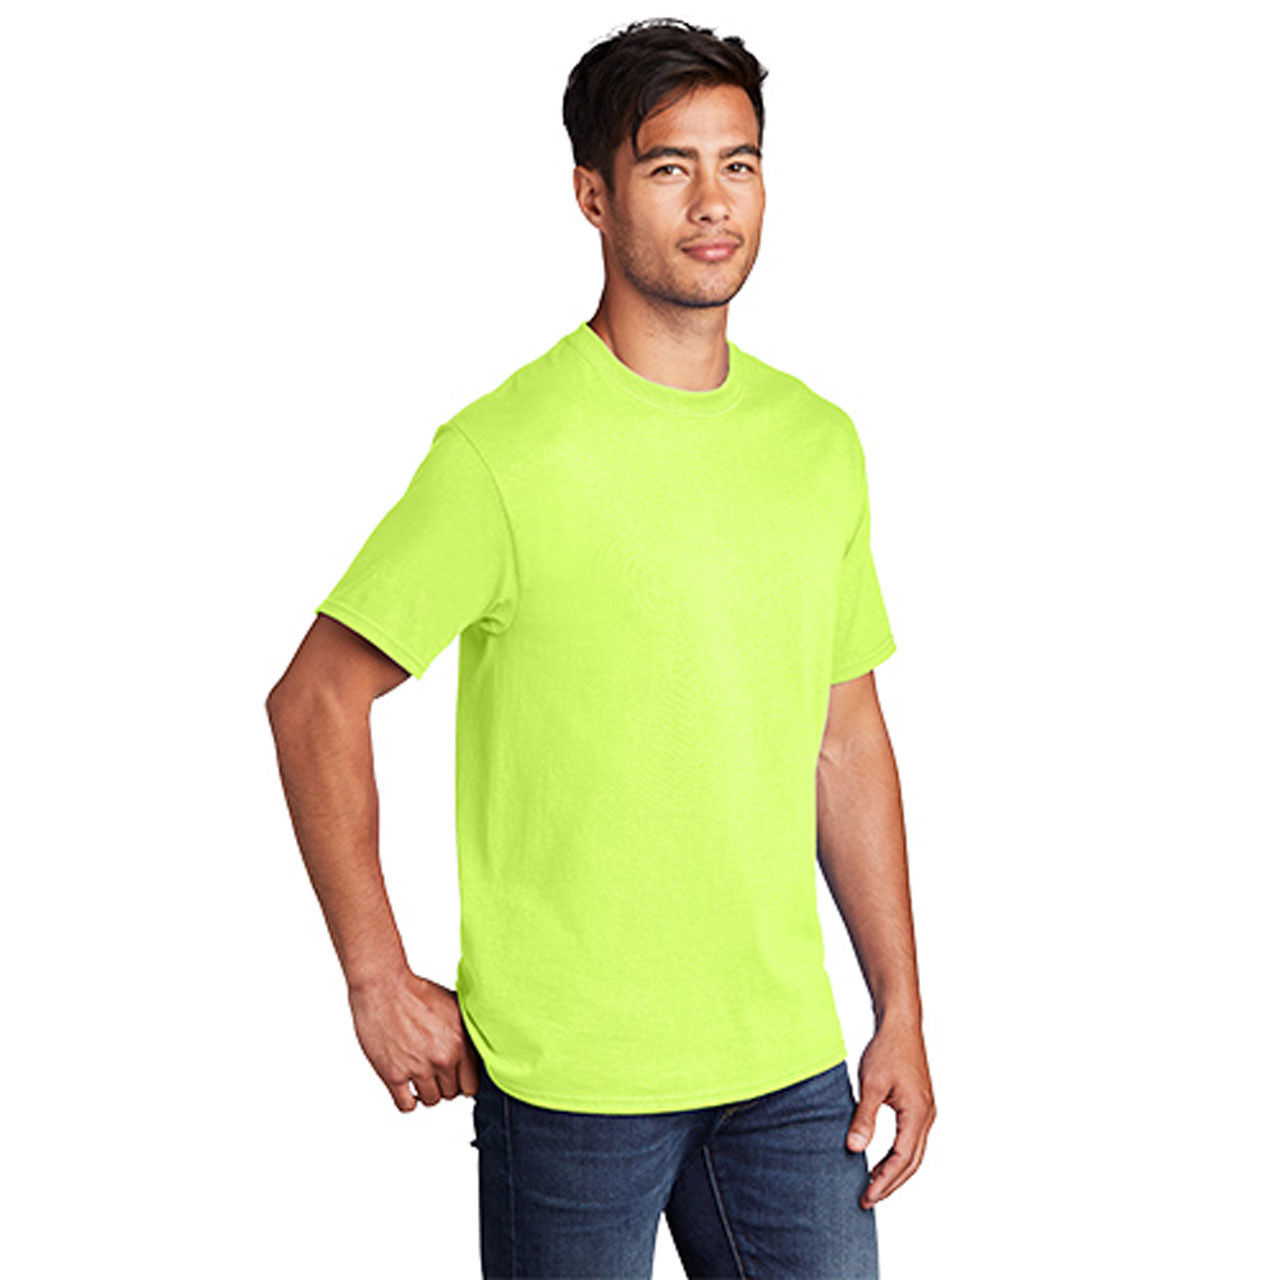 How should I care for these cheap neon shirts before I buy?